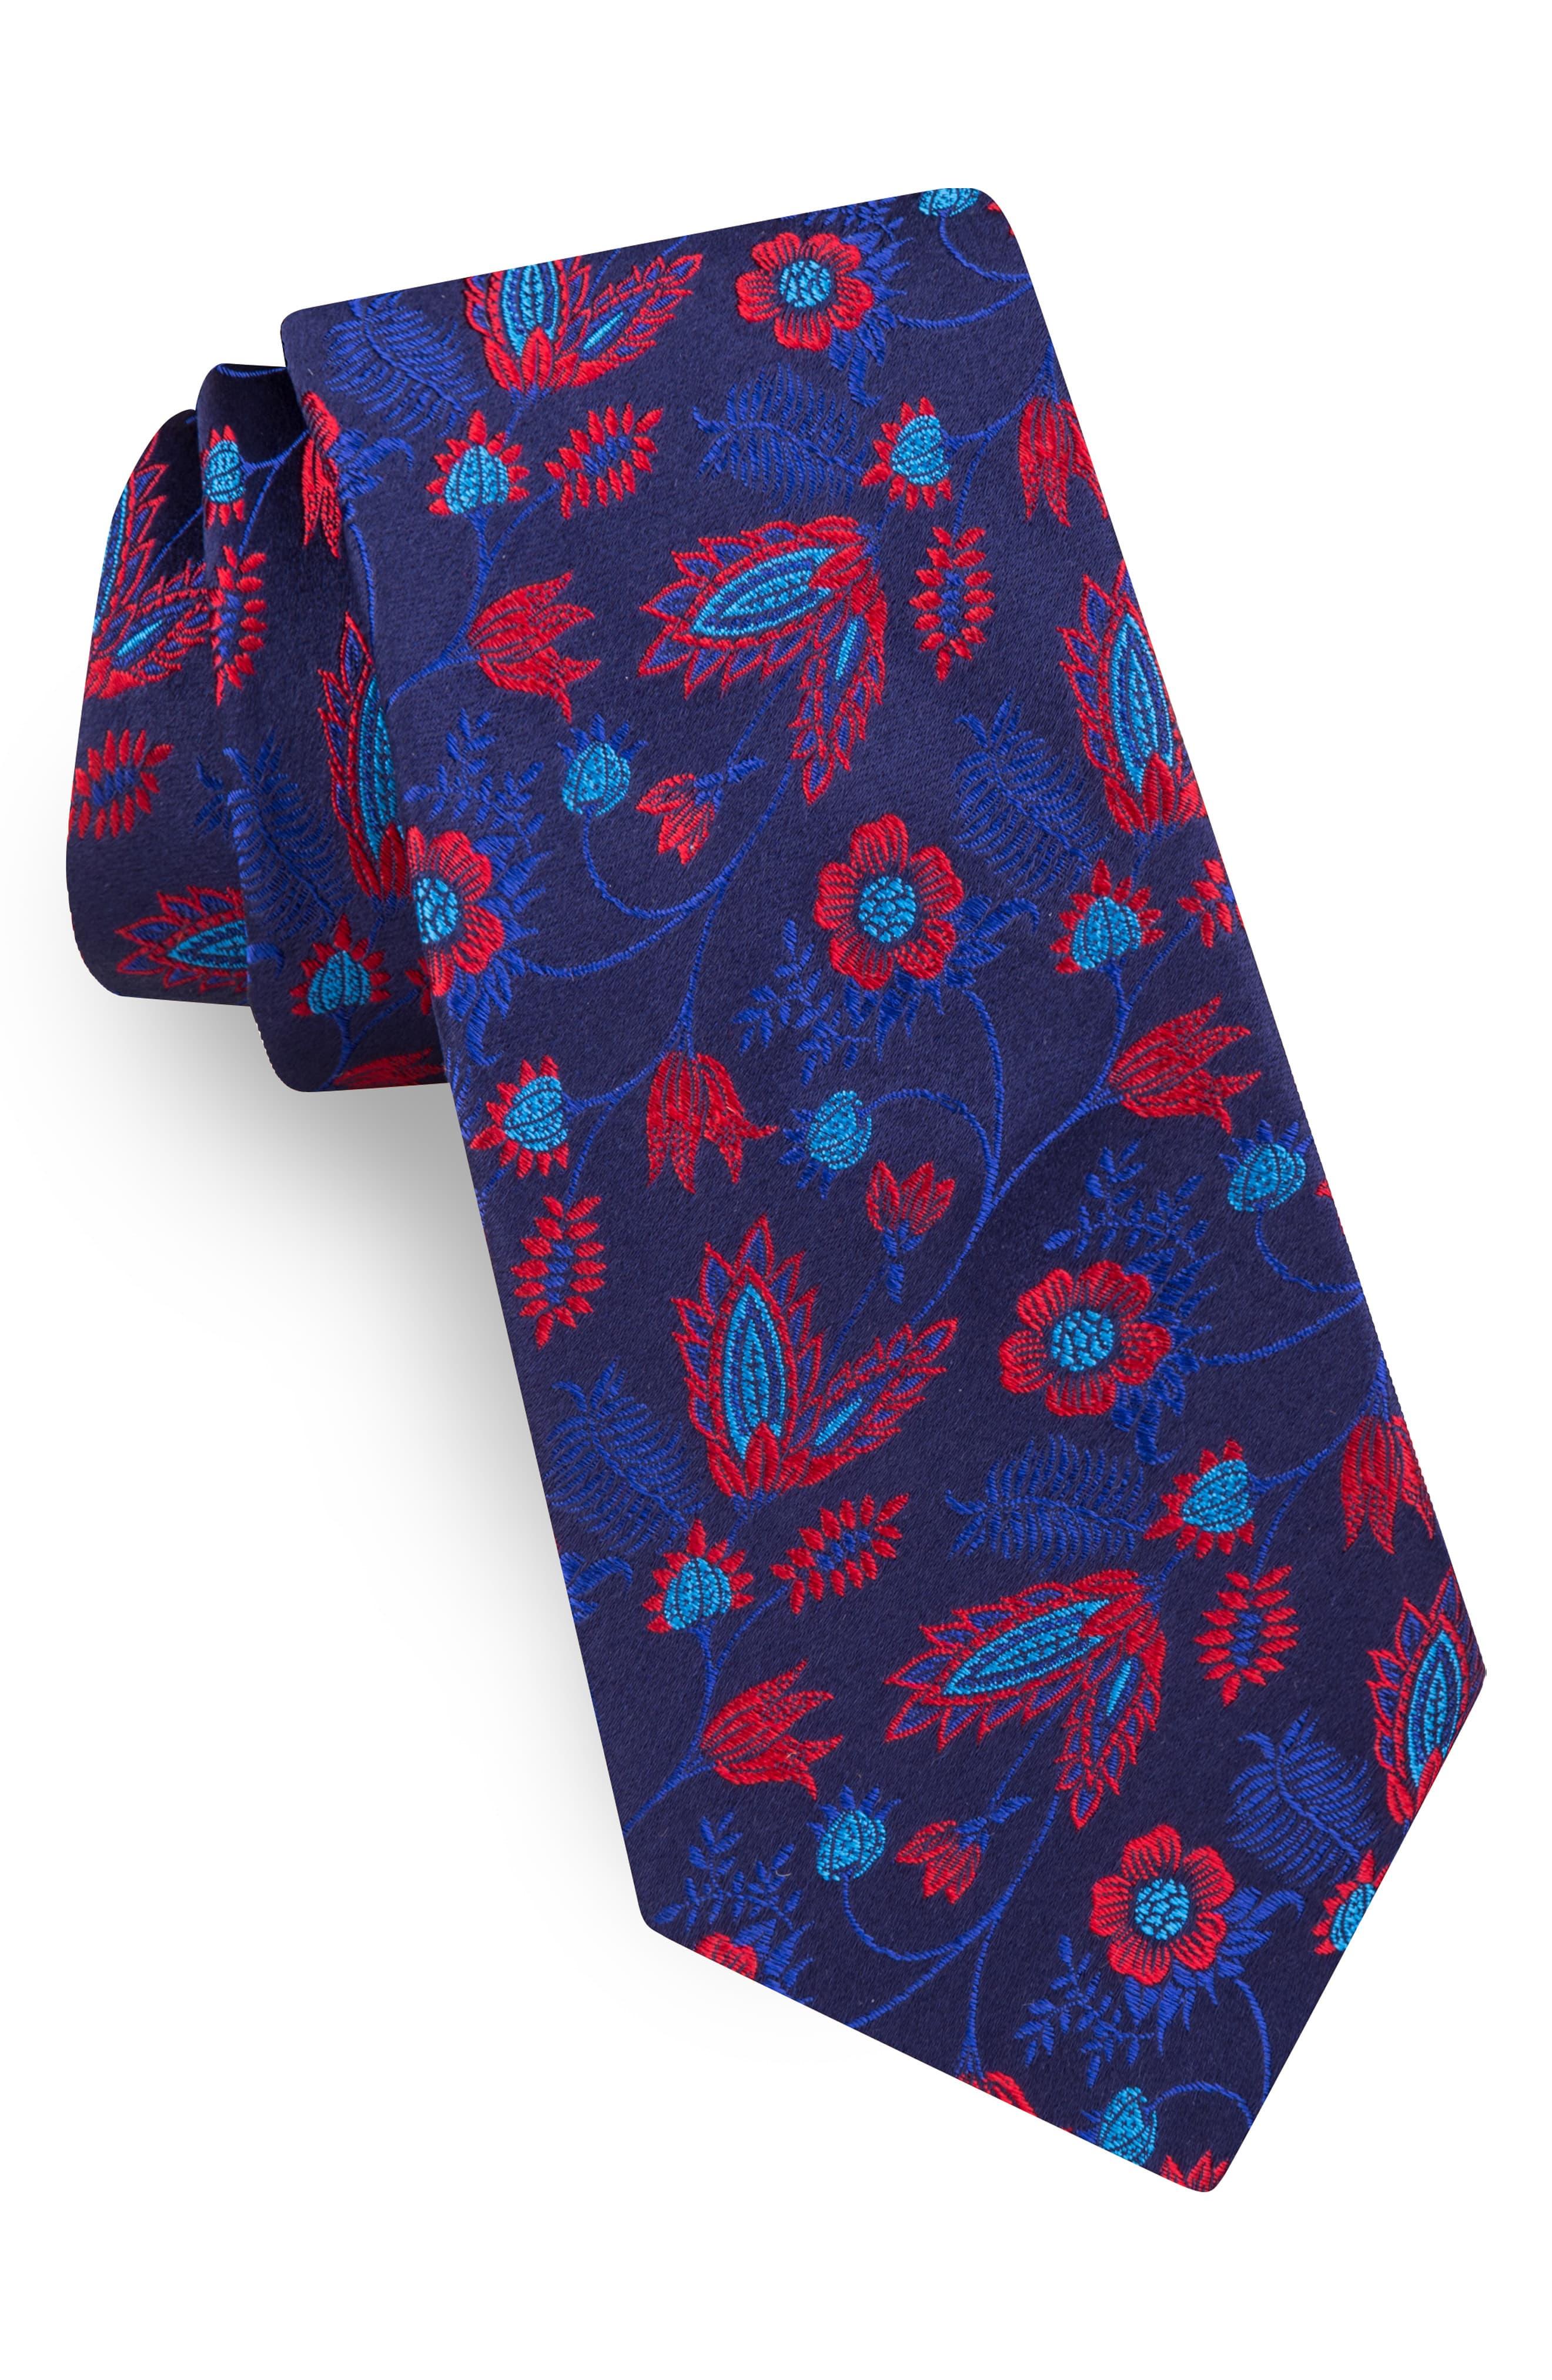 Ted Baker Floral Silk Tie in Red for Men - Lyst